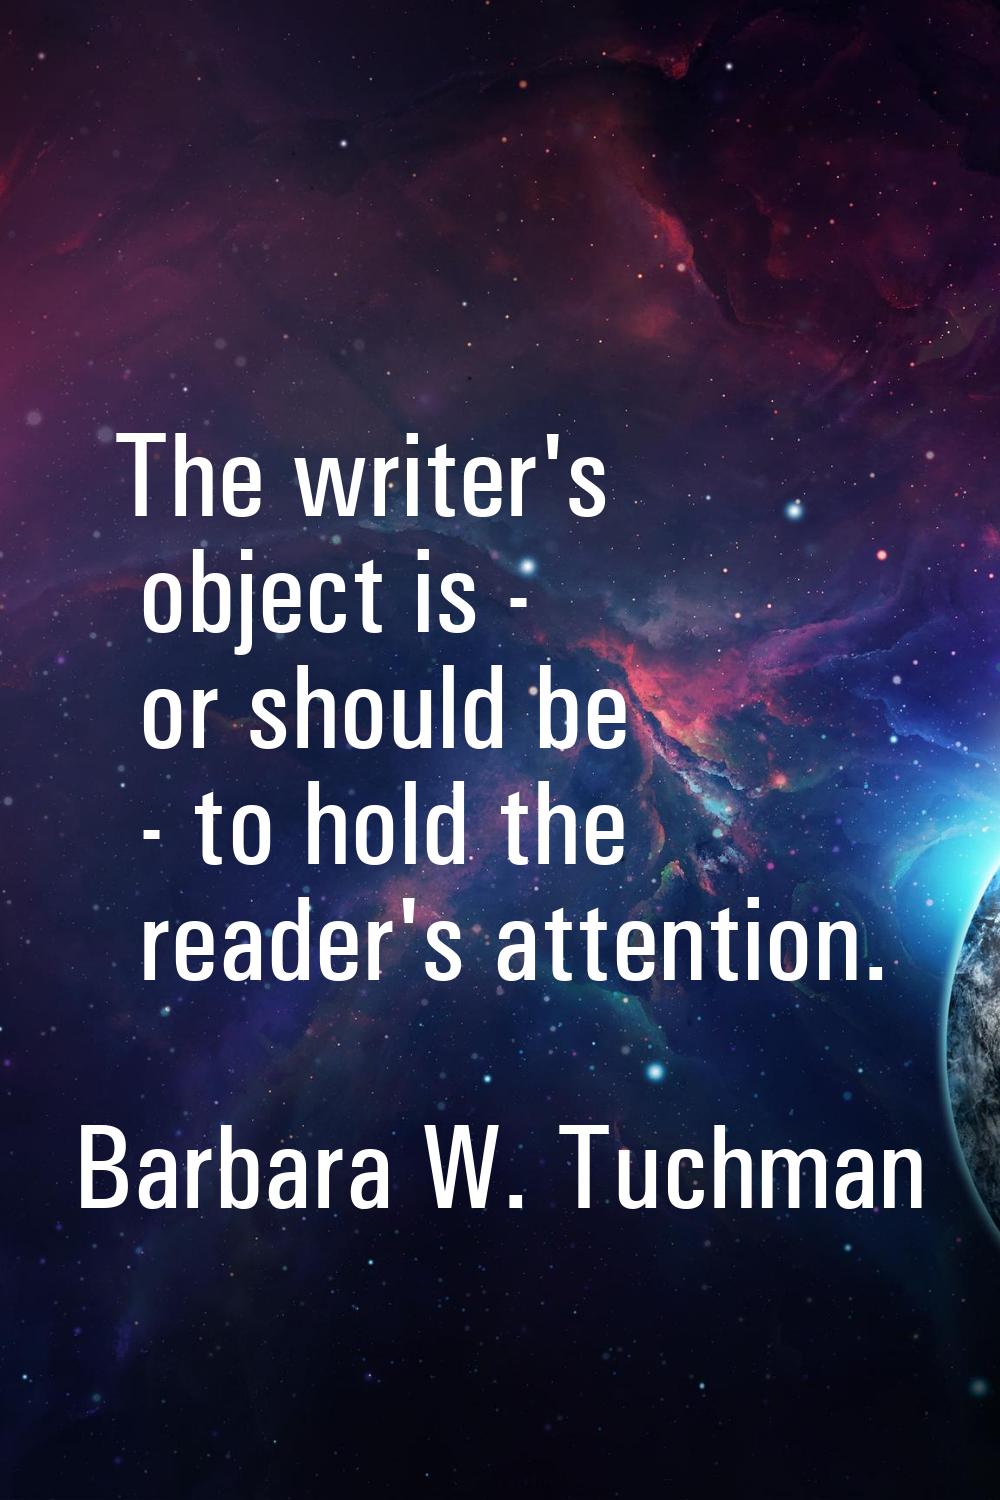 The writer's object is - or should be - to hold the reader's attention.